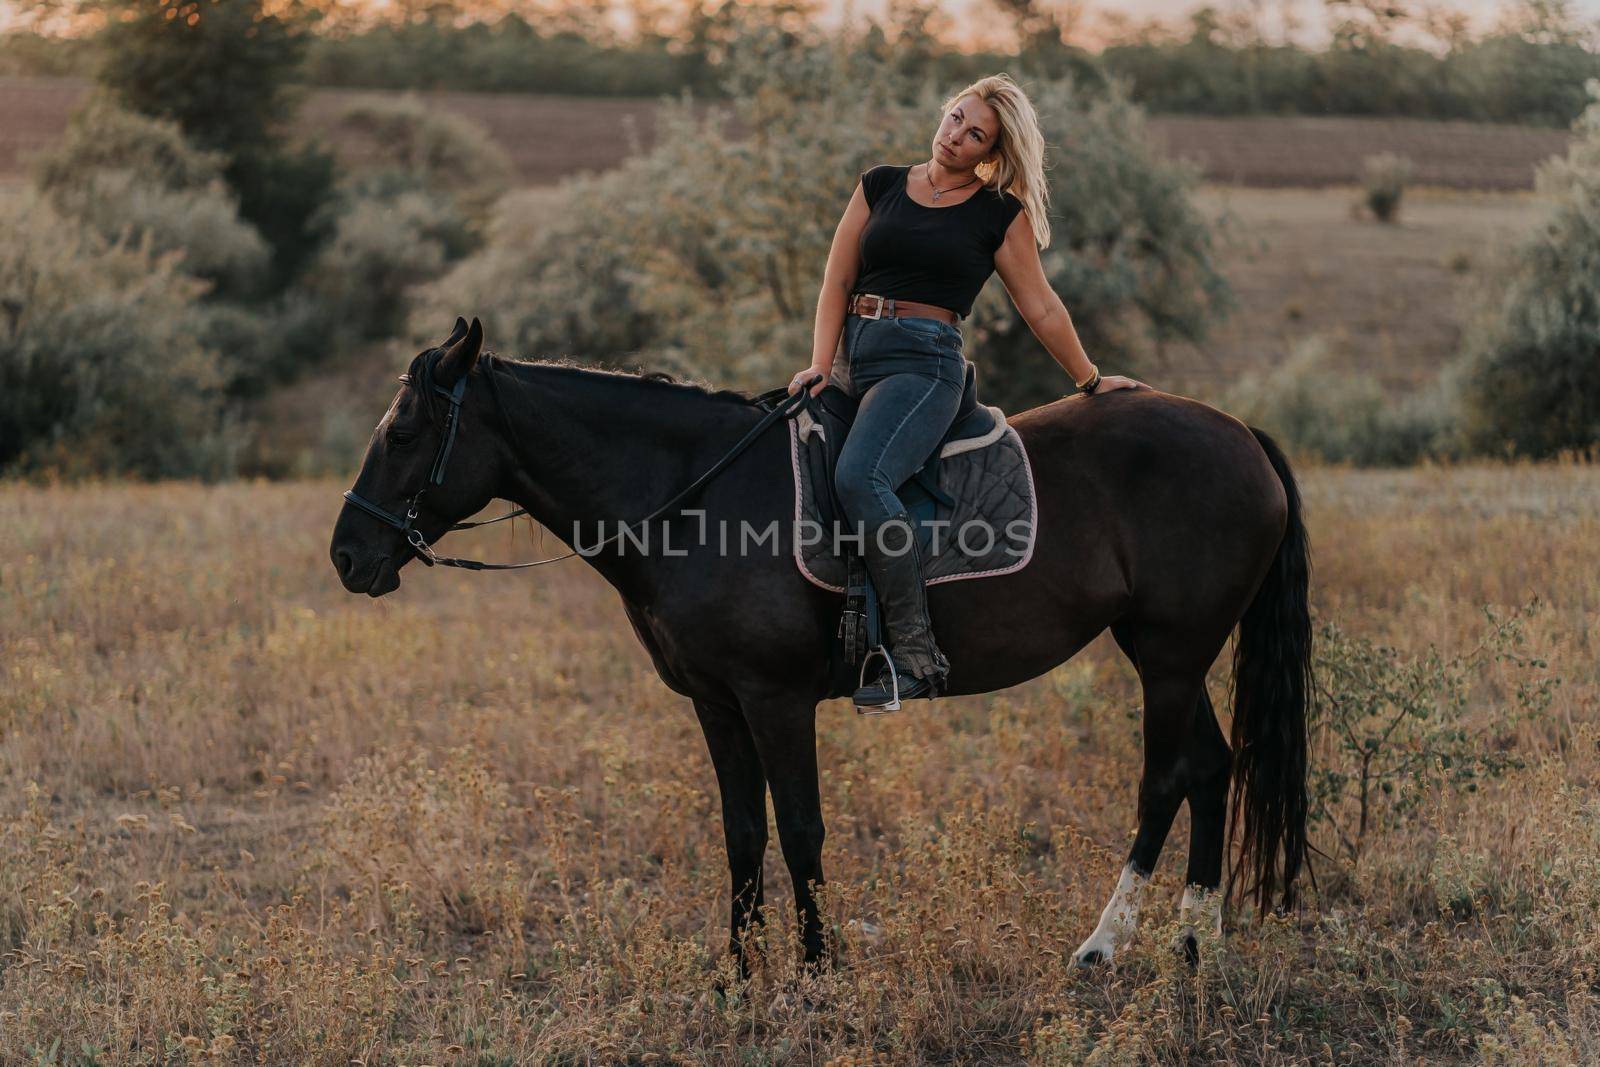 Pretty woman sitting on horse on nature background. Concept of love, friendship, farm animals. High quality photo